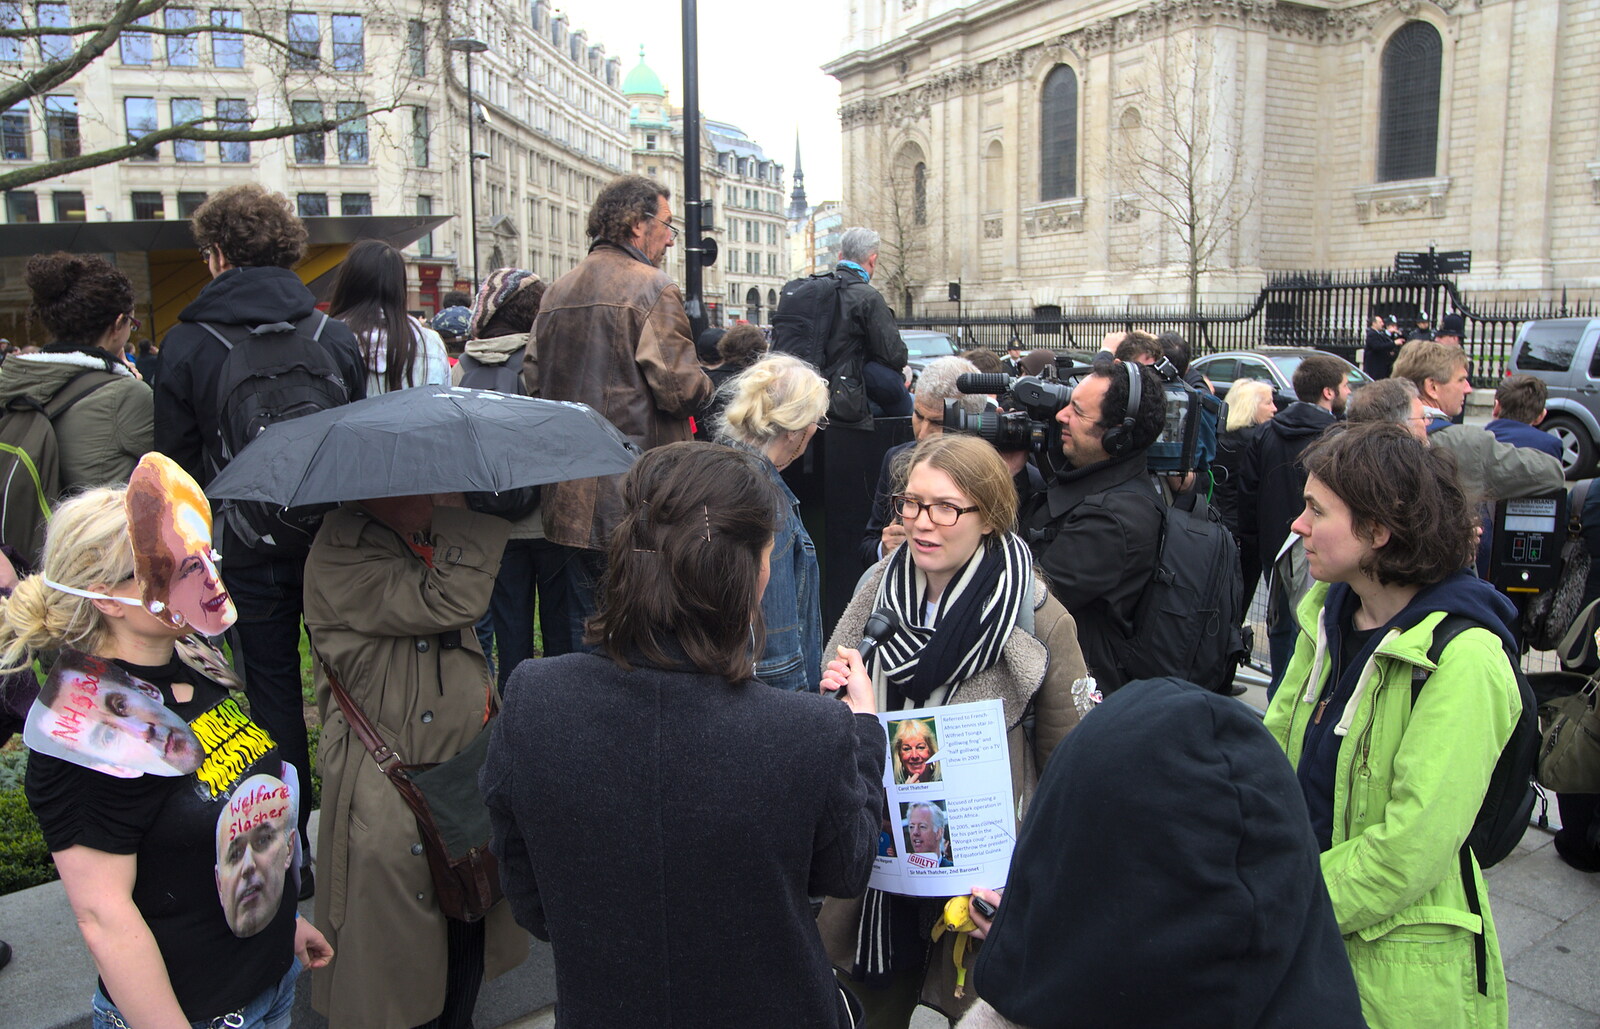 More interviewing from Margaret Thatcher's Funeral, St. Paul's, London - 17th April 2013